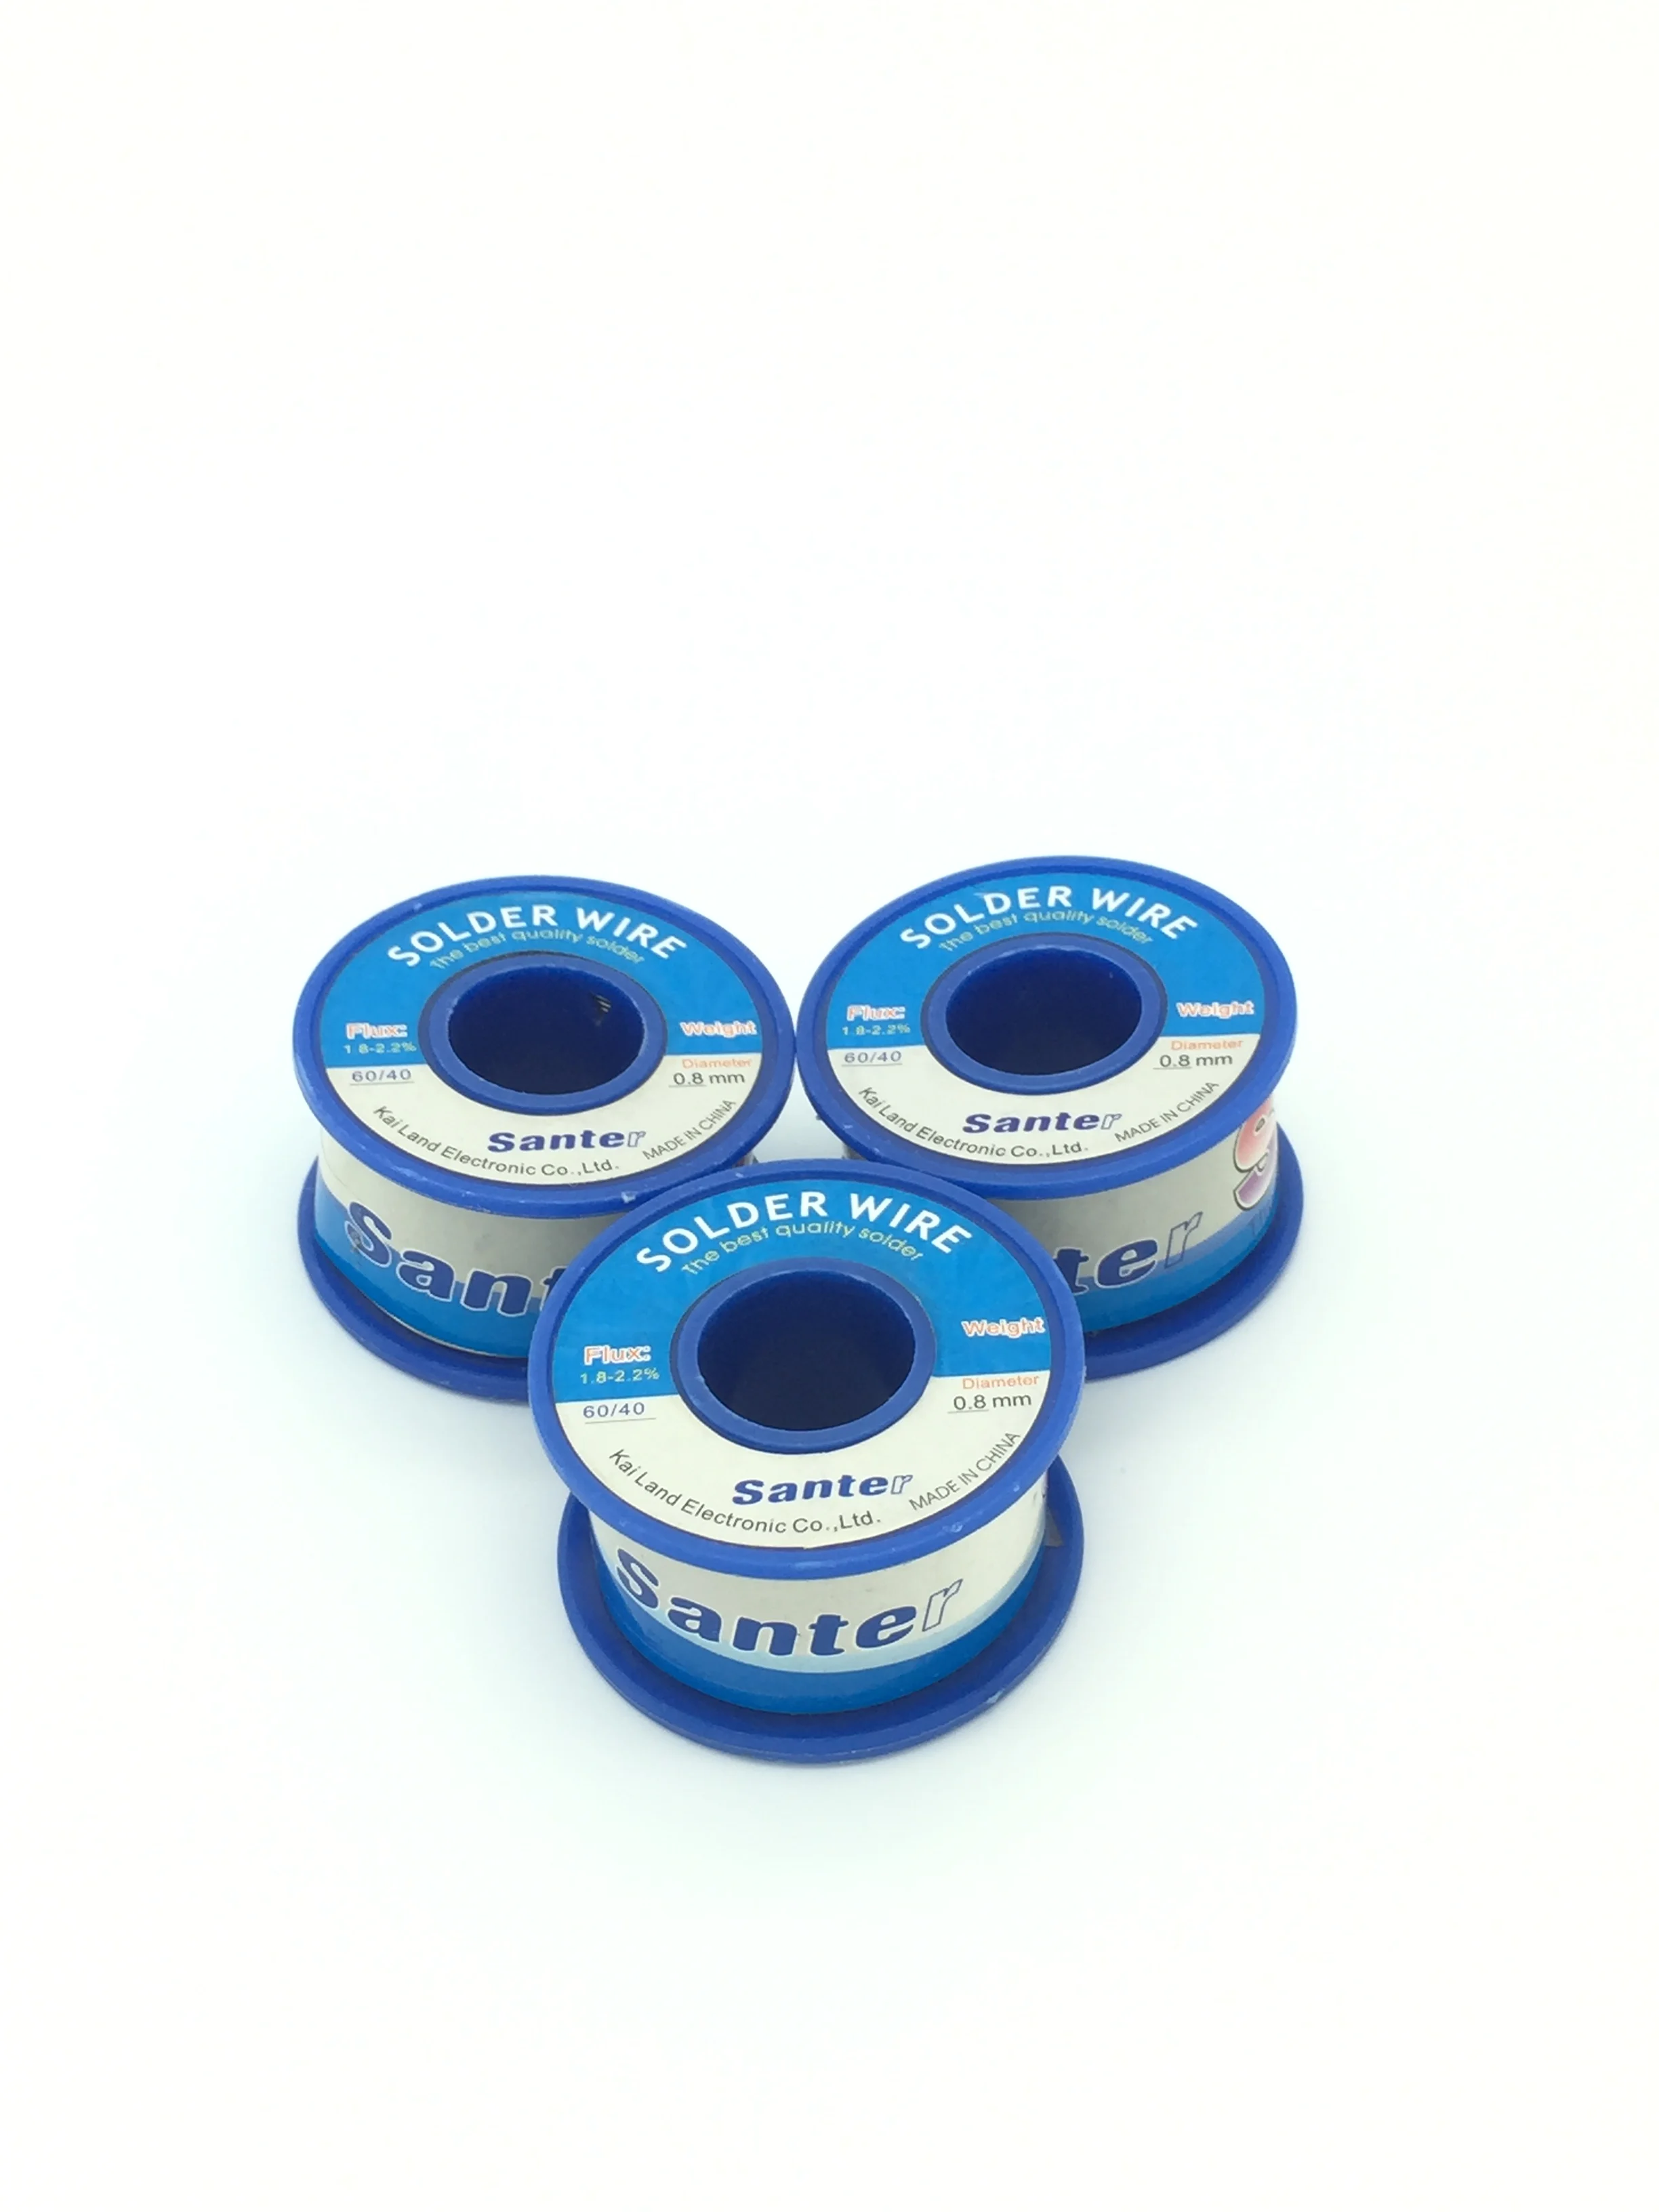 Santer 60/40 Hight quality No Cleaning Solder Wire  0.8mm  100g Tin Flux Rosin Activated Cored Welding Wire